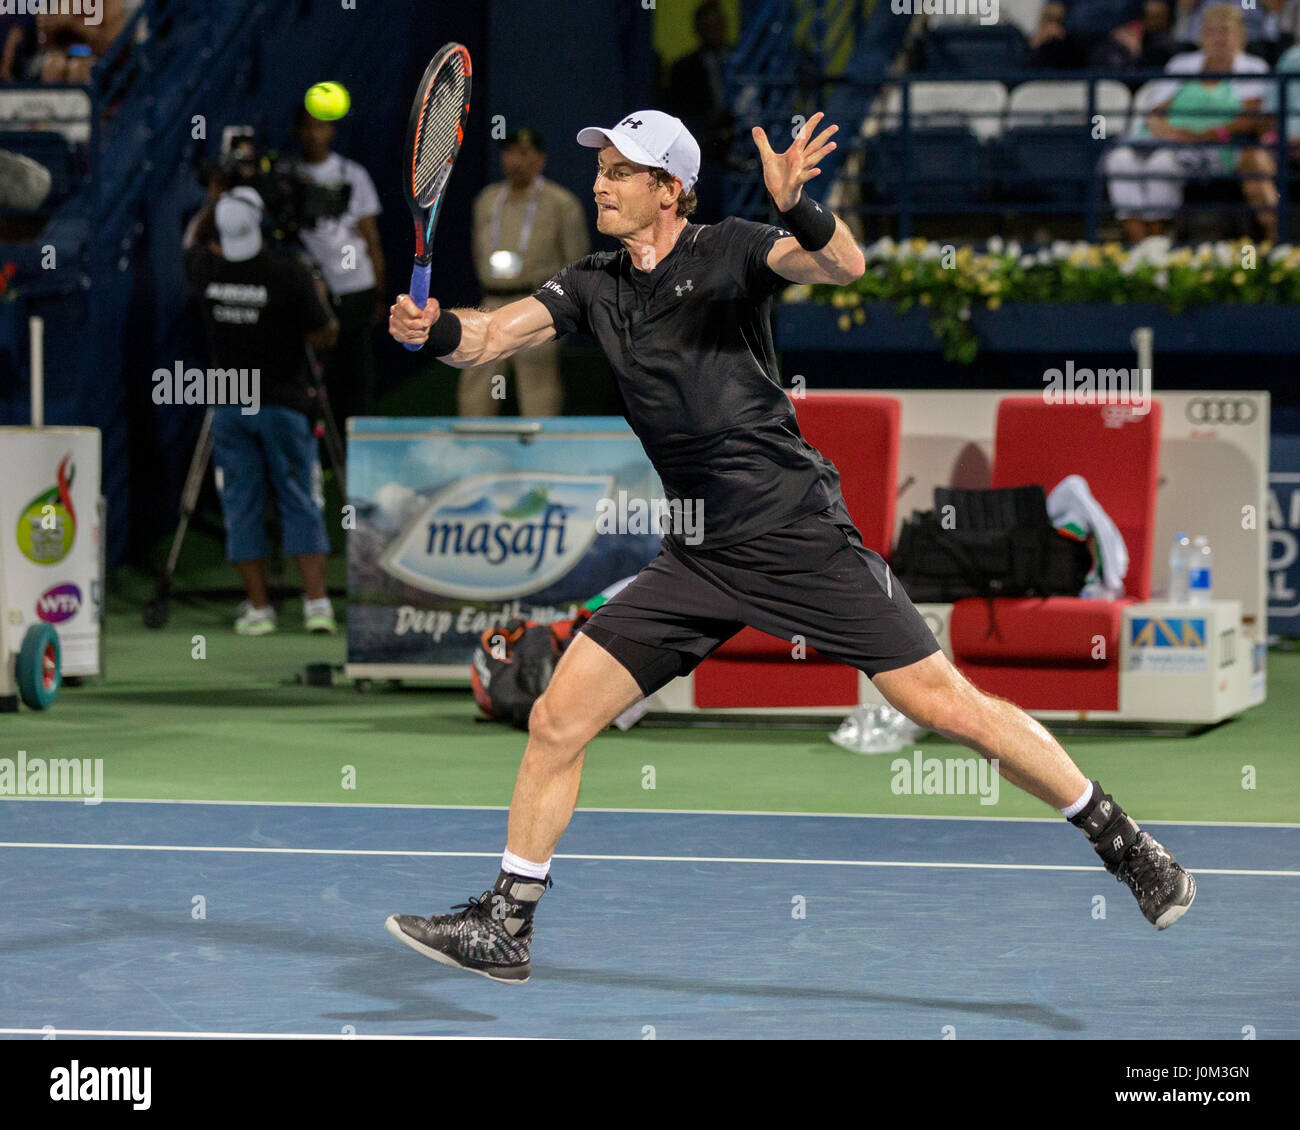 ANDY MURRAY (GBR) en action Banque D'Images